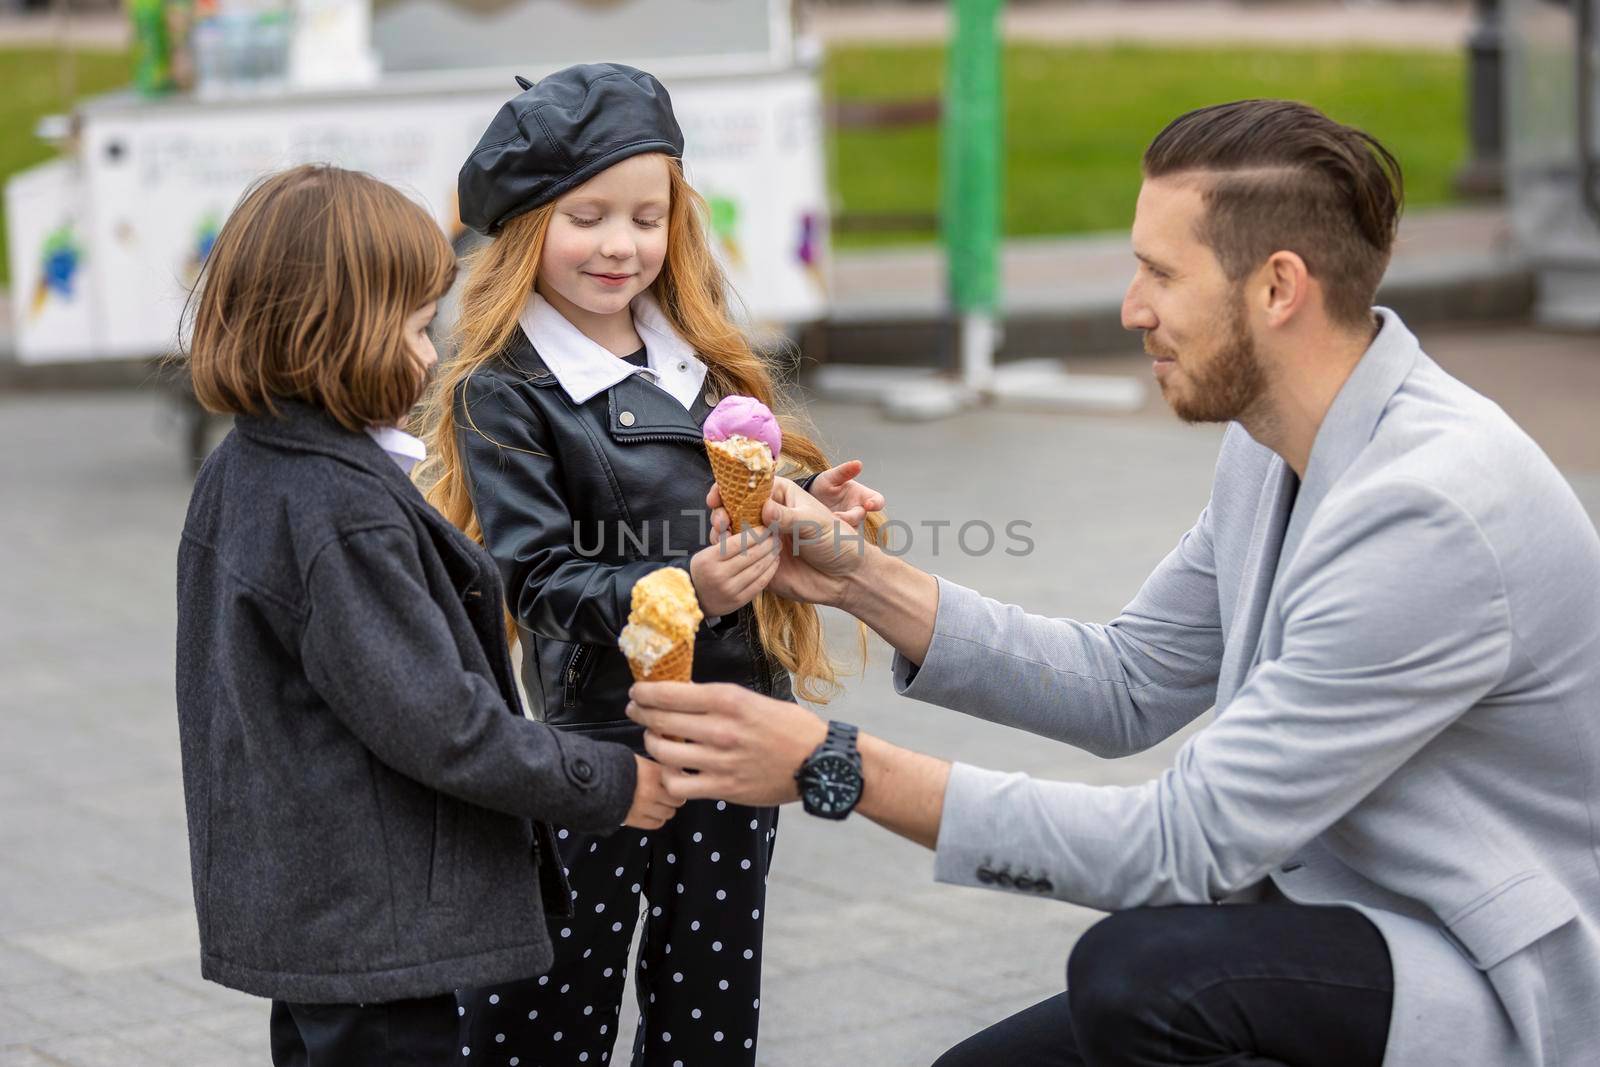 Man gives ice cream to children by zokov